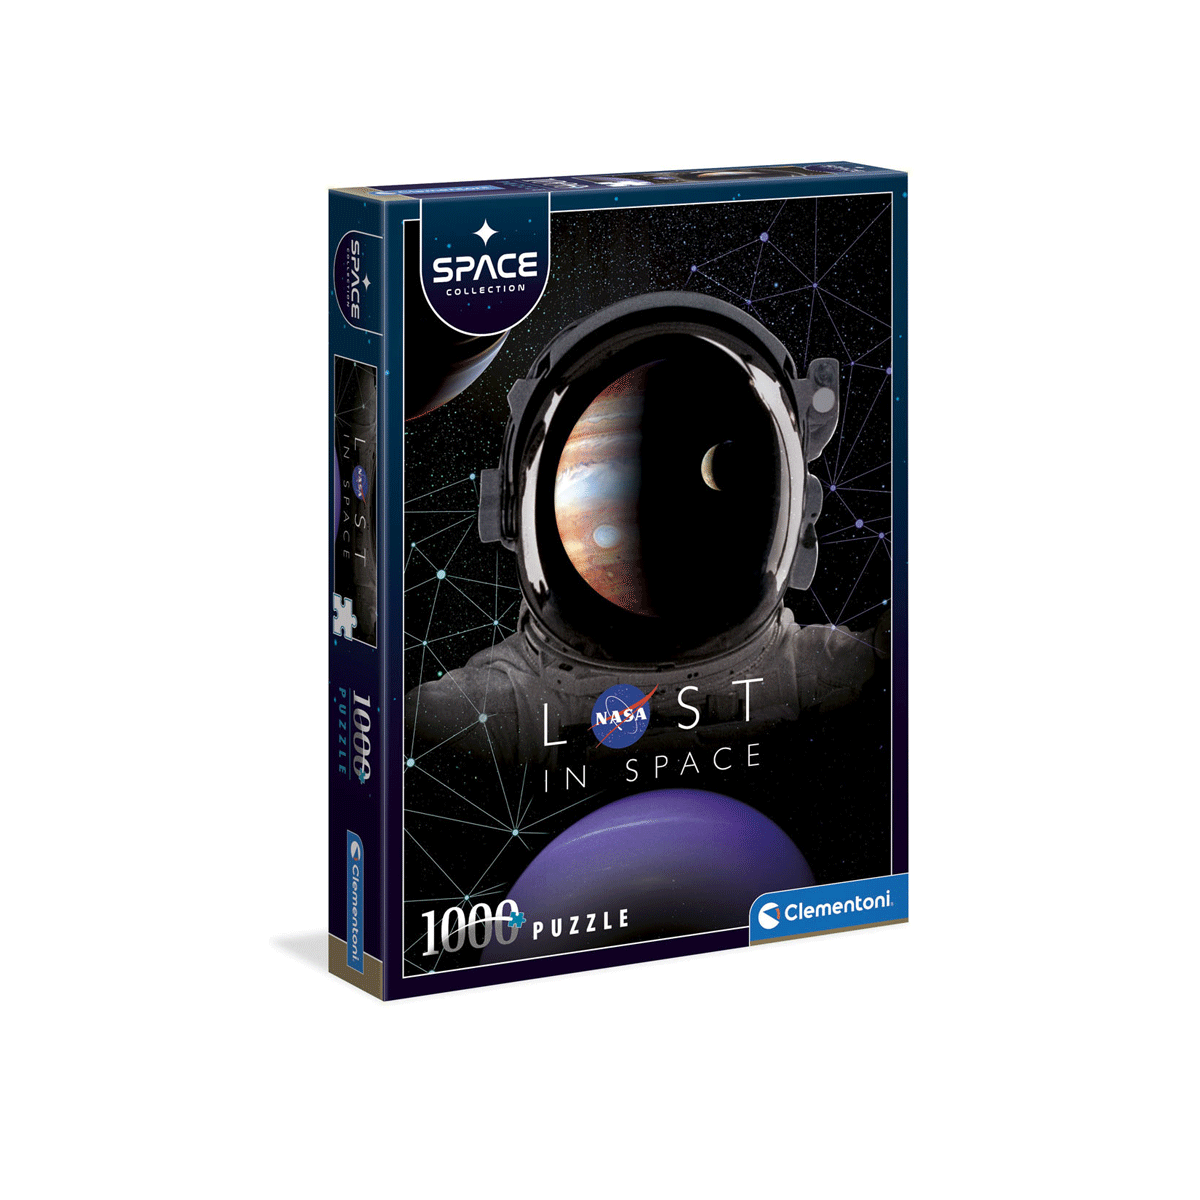 Clementoni - space collection - lost in space - puzzle adulti 1000 pezzi - 